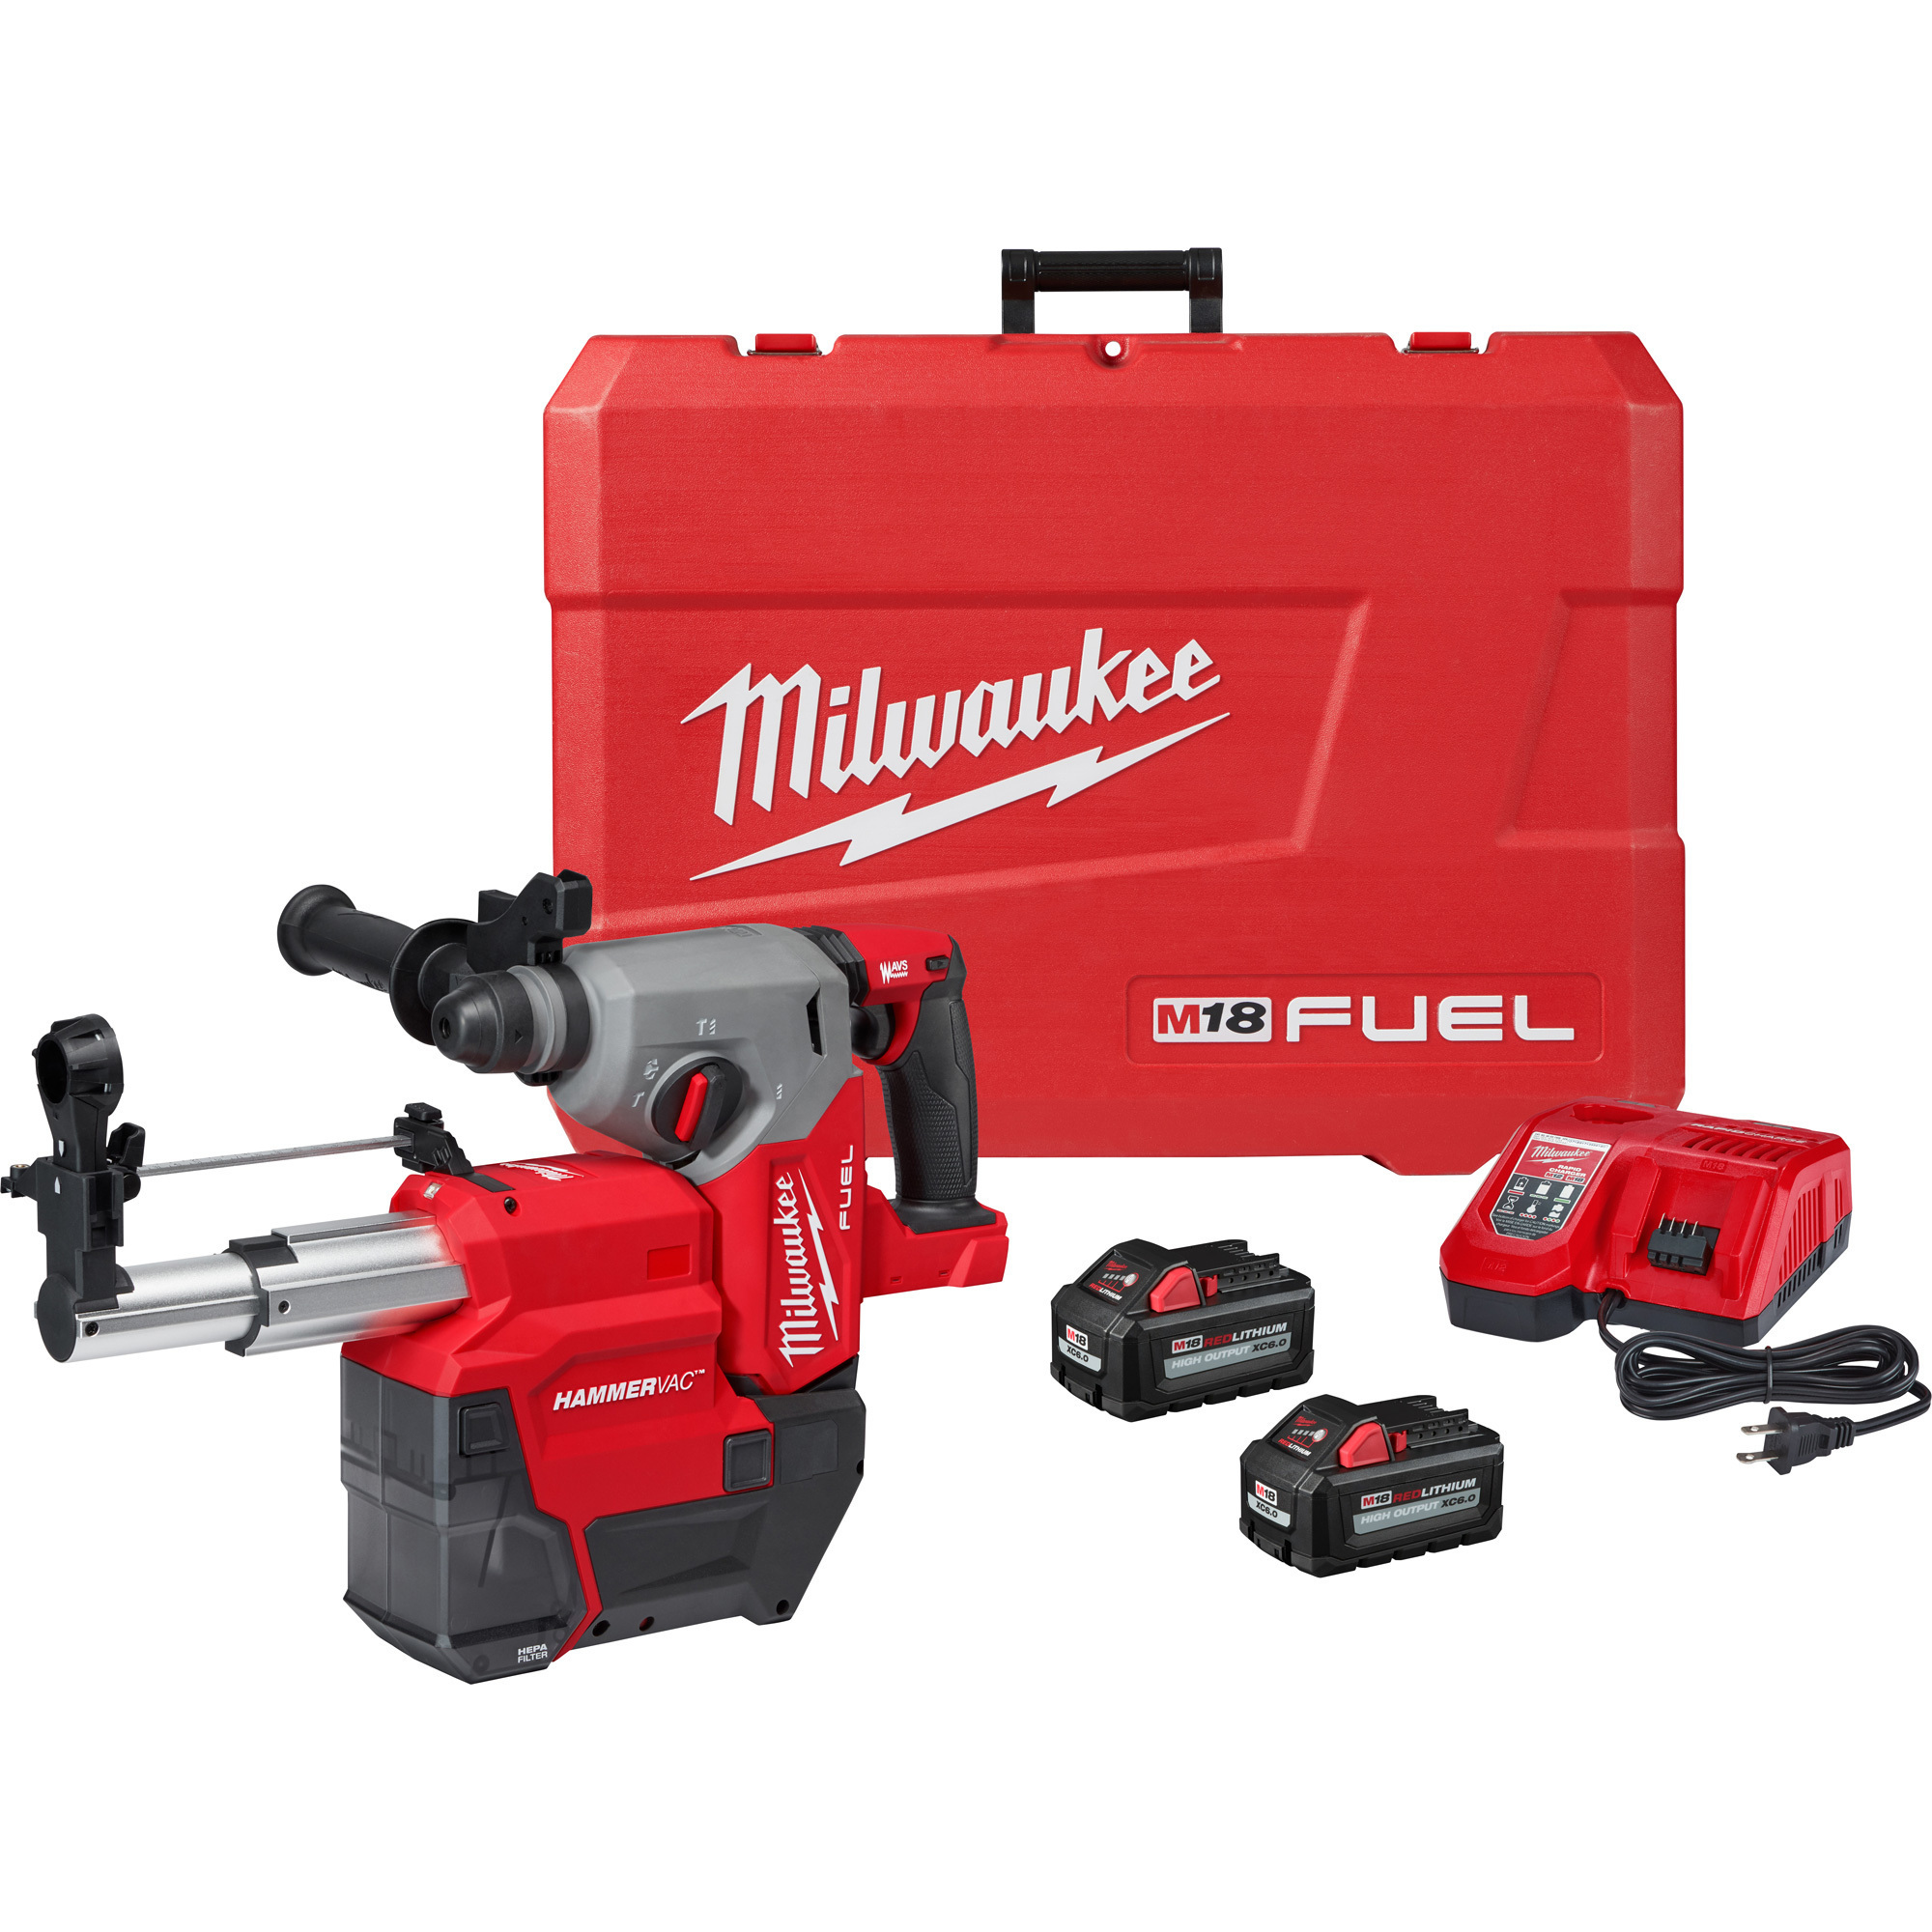 Milwaukee M18 FUEL 1Inch SDS Plus Rotary Hammer with Dust Extractor Kit, 2 Batteries, Model 2912-22DE